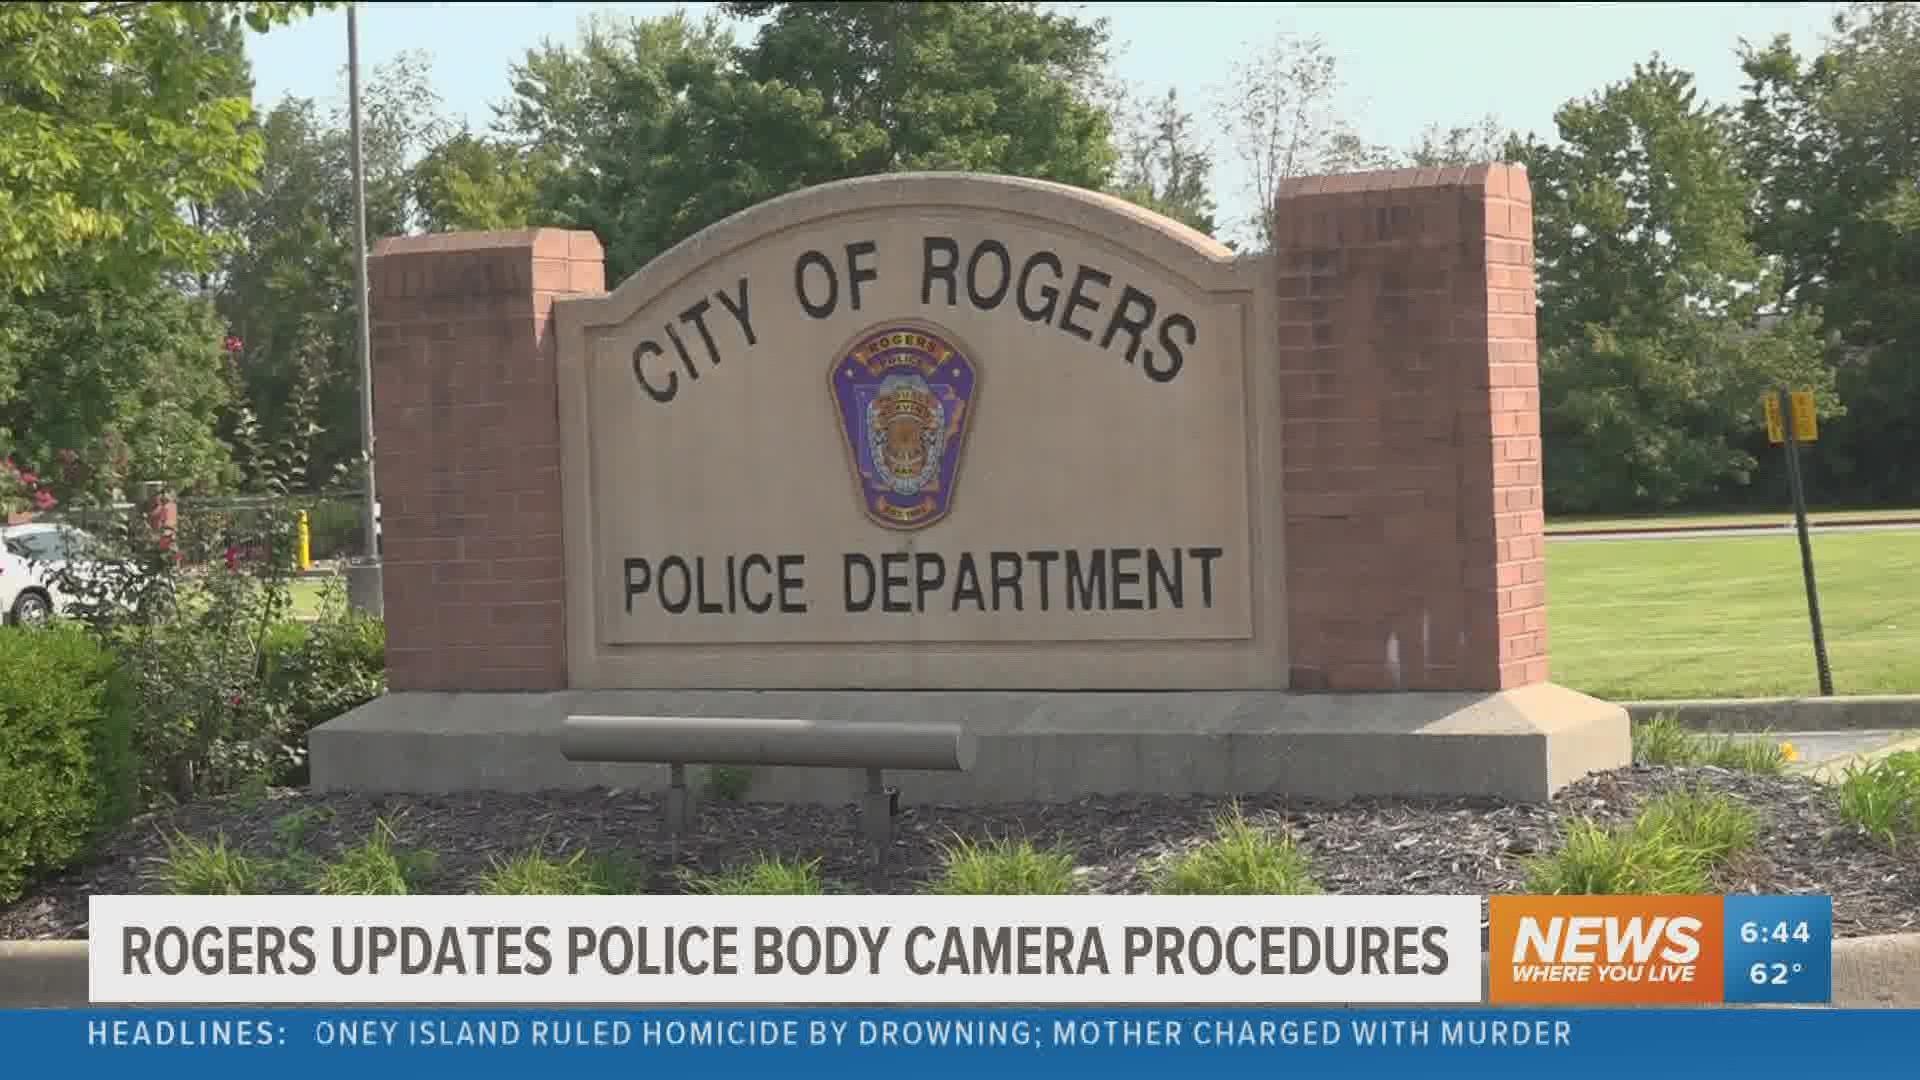 Soon, the Rogers Police Department will deploy body cameras for all uniformed officers to promote accountability.